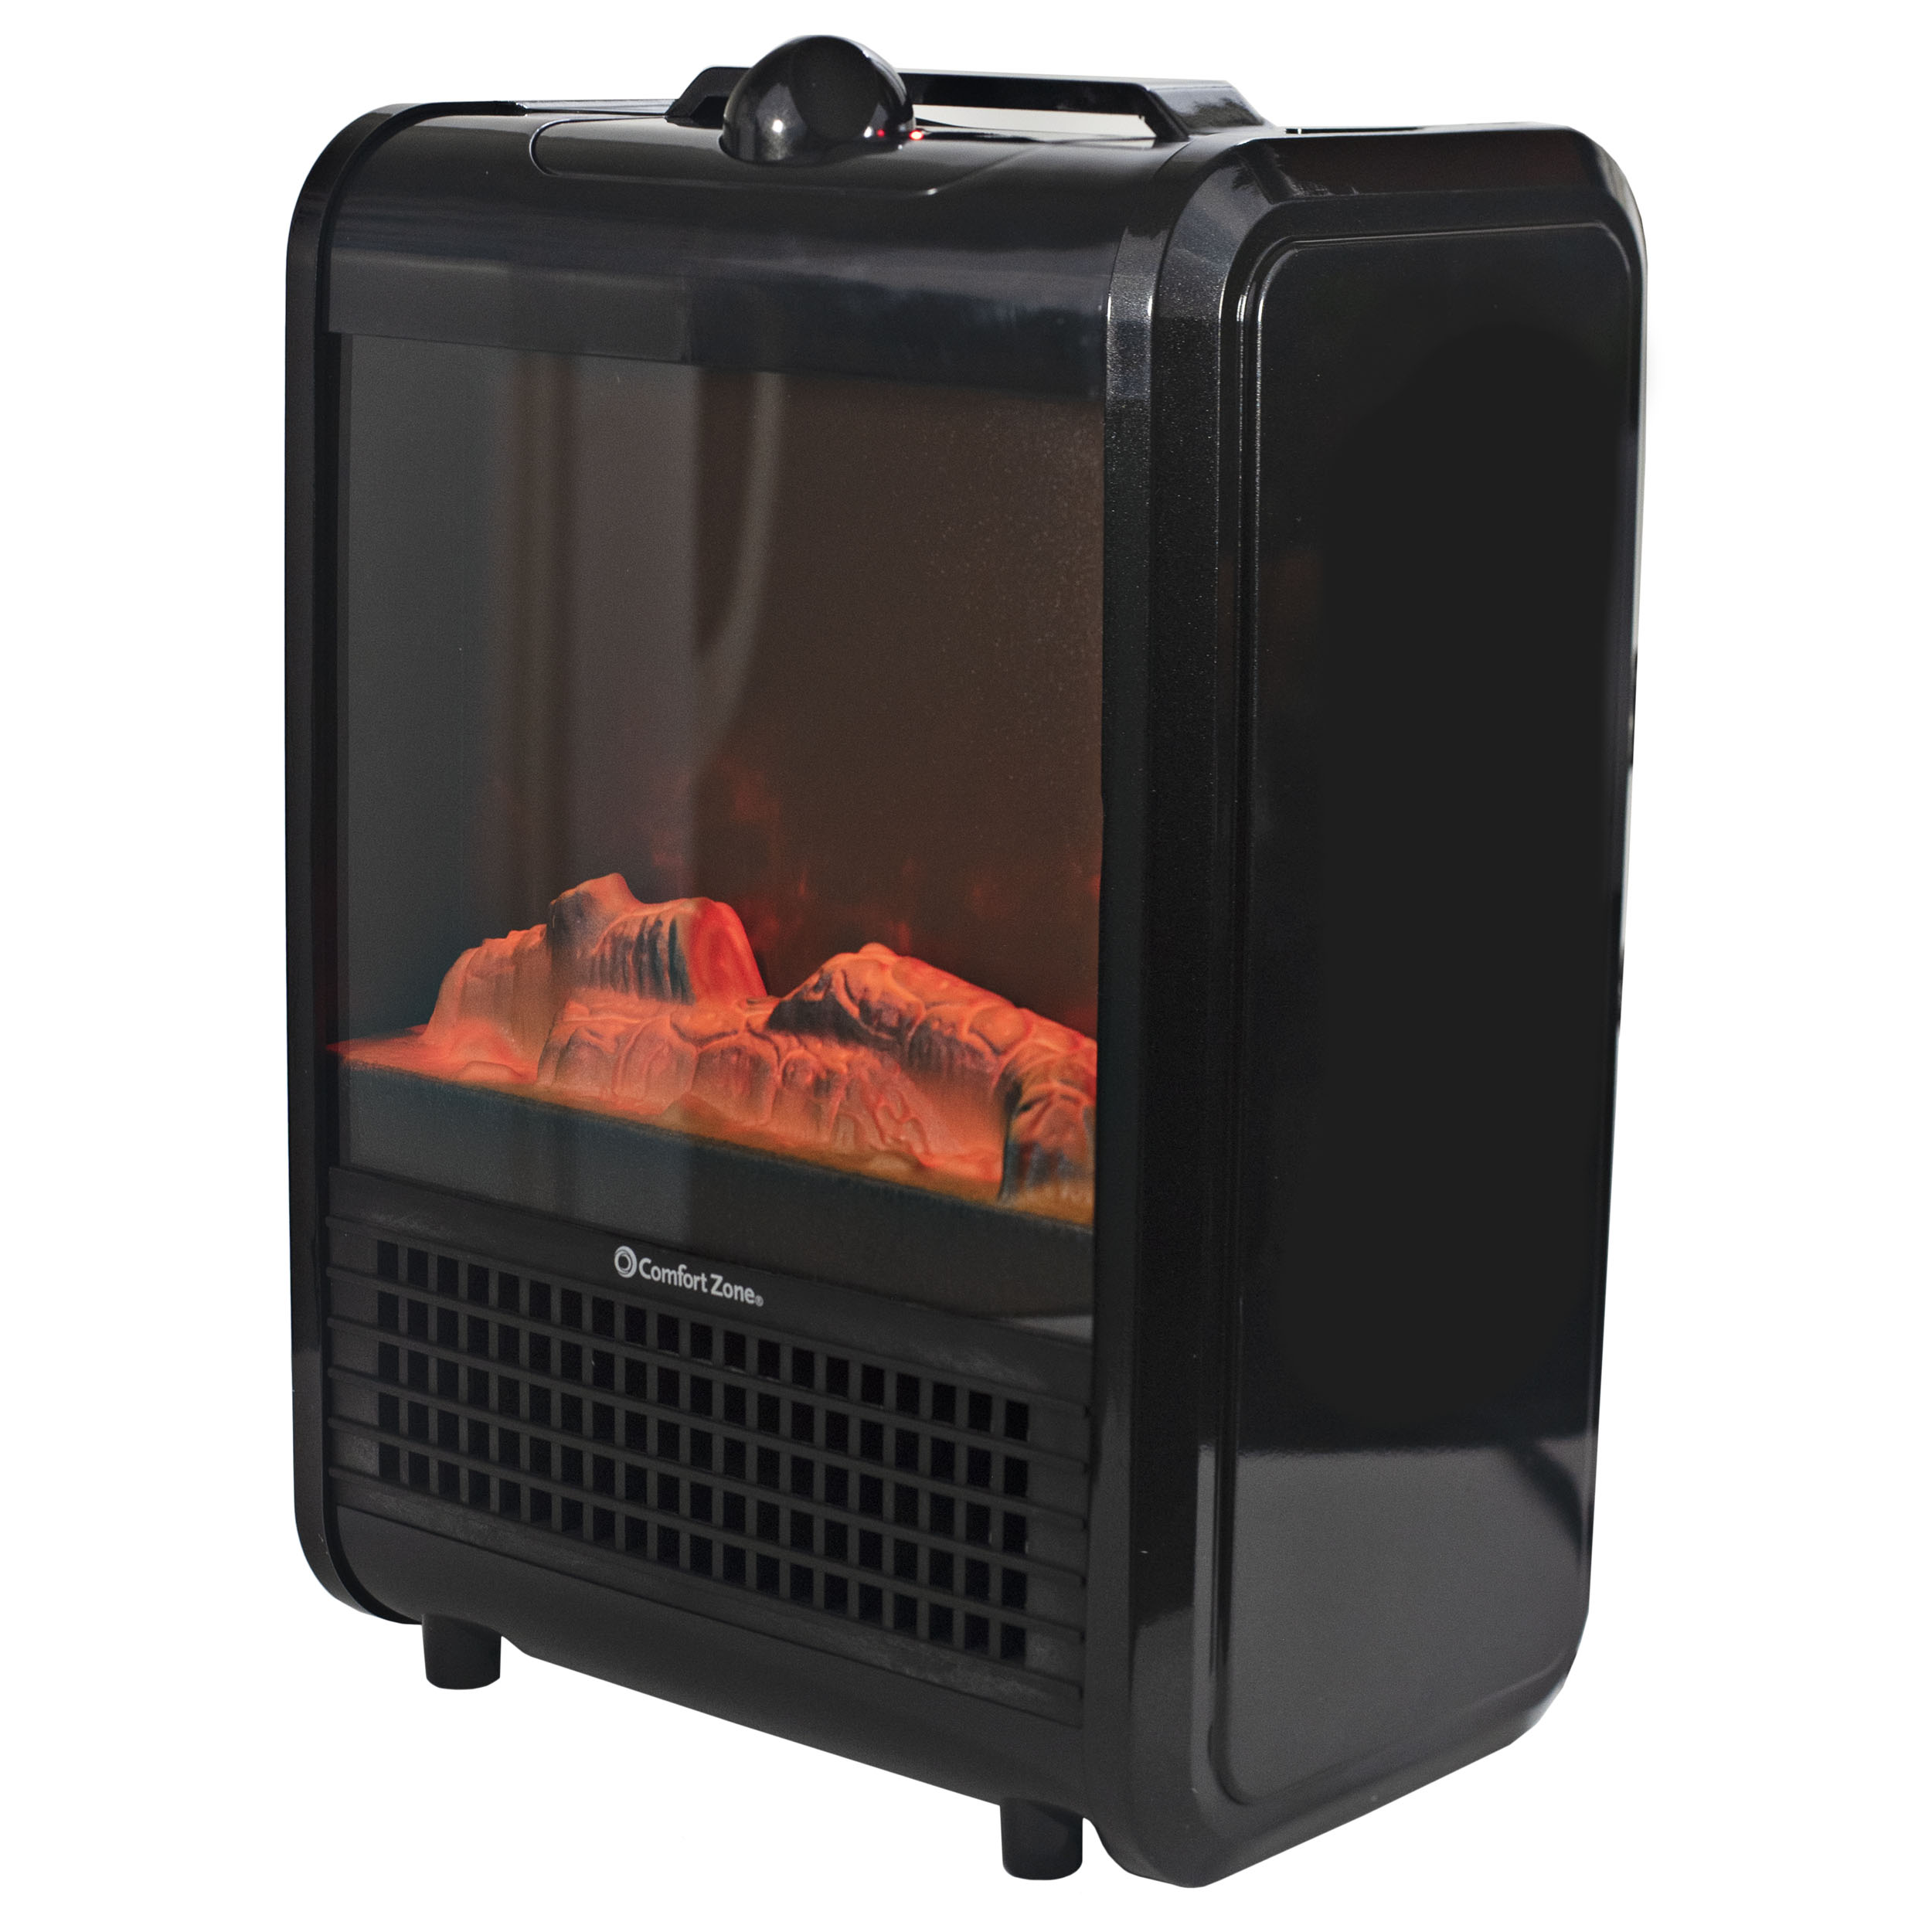 Comfort Zone 1200W Ceramic Electric Fireplace Heater, Black - image 4 of 9